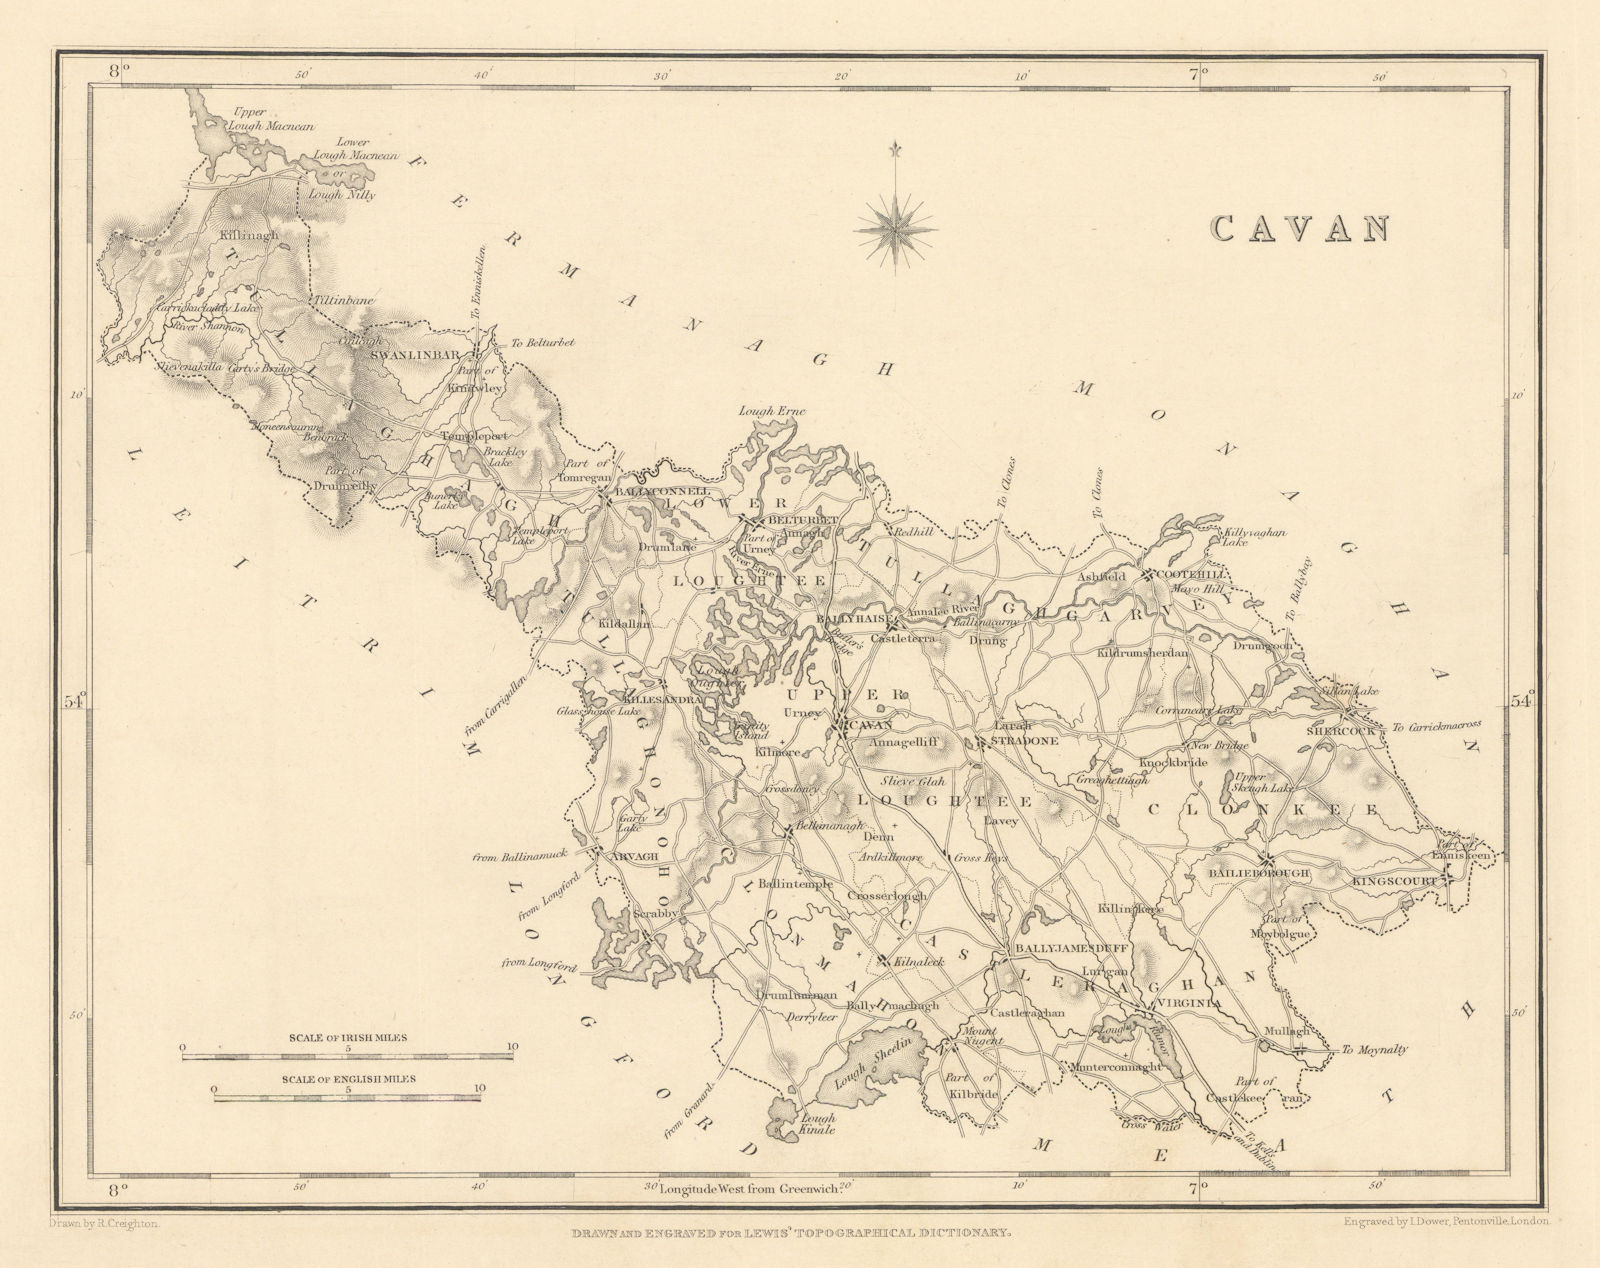 COUNTY CAVAN antique map for LEWIS by CREIGHTON & DOWER - Ireland 1837 old